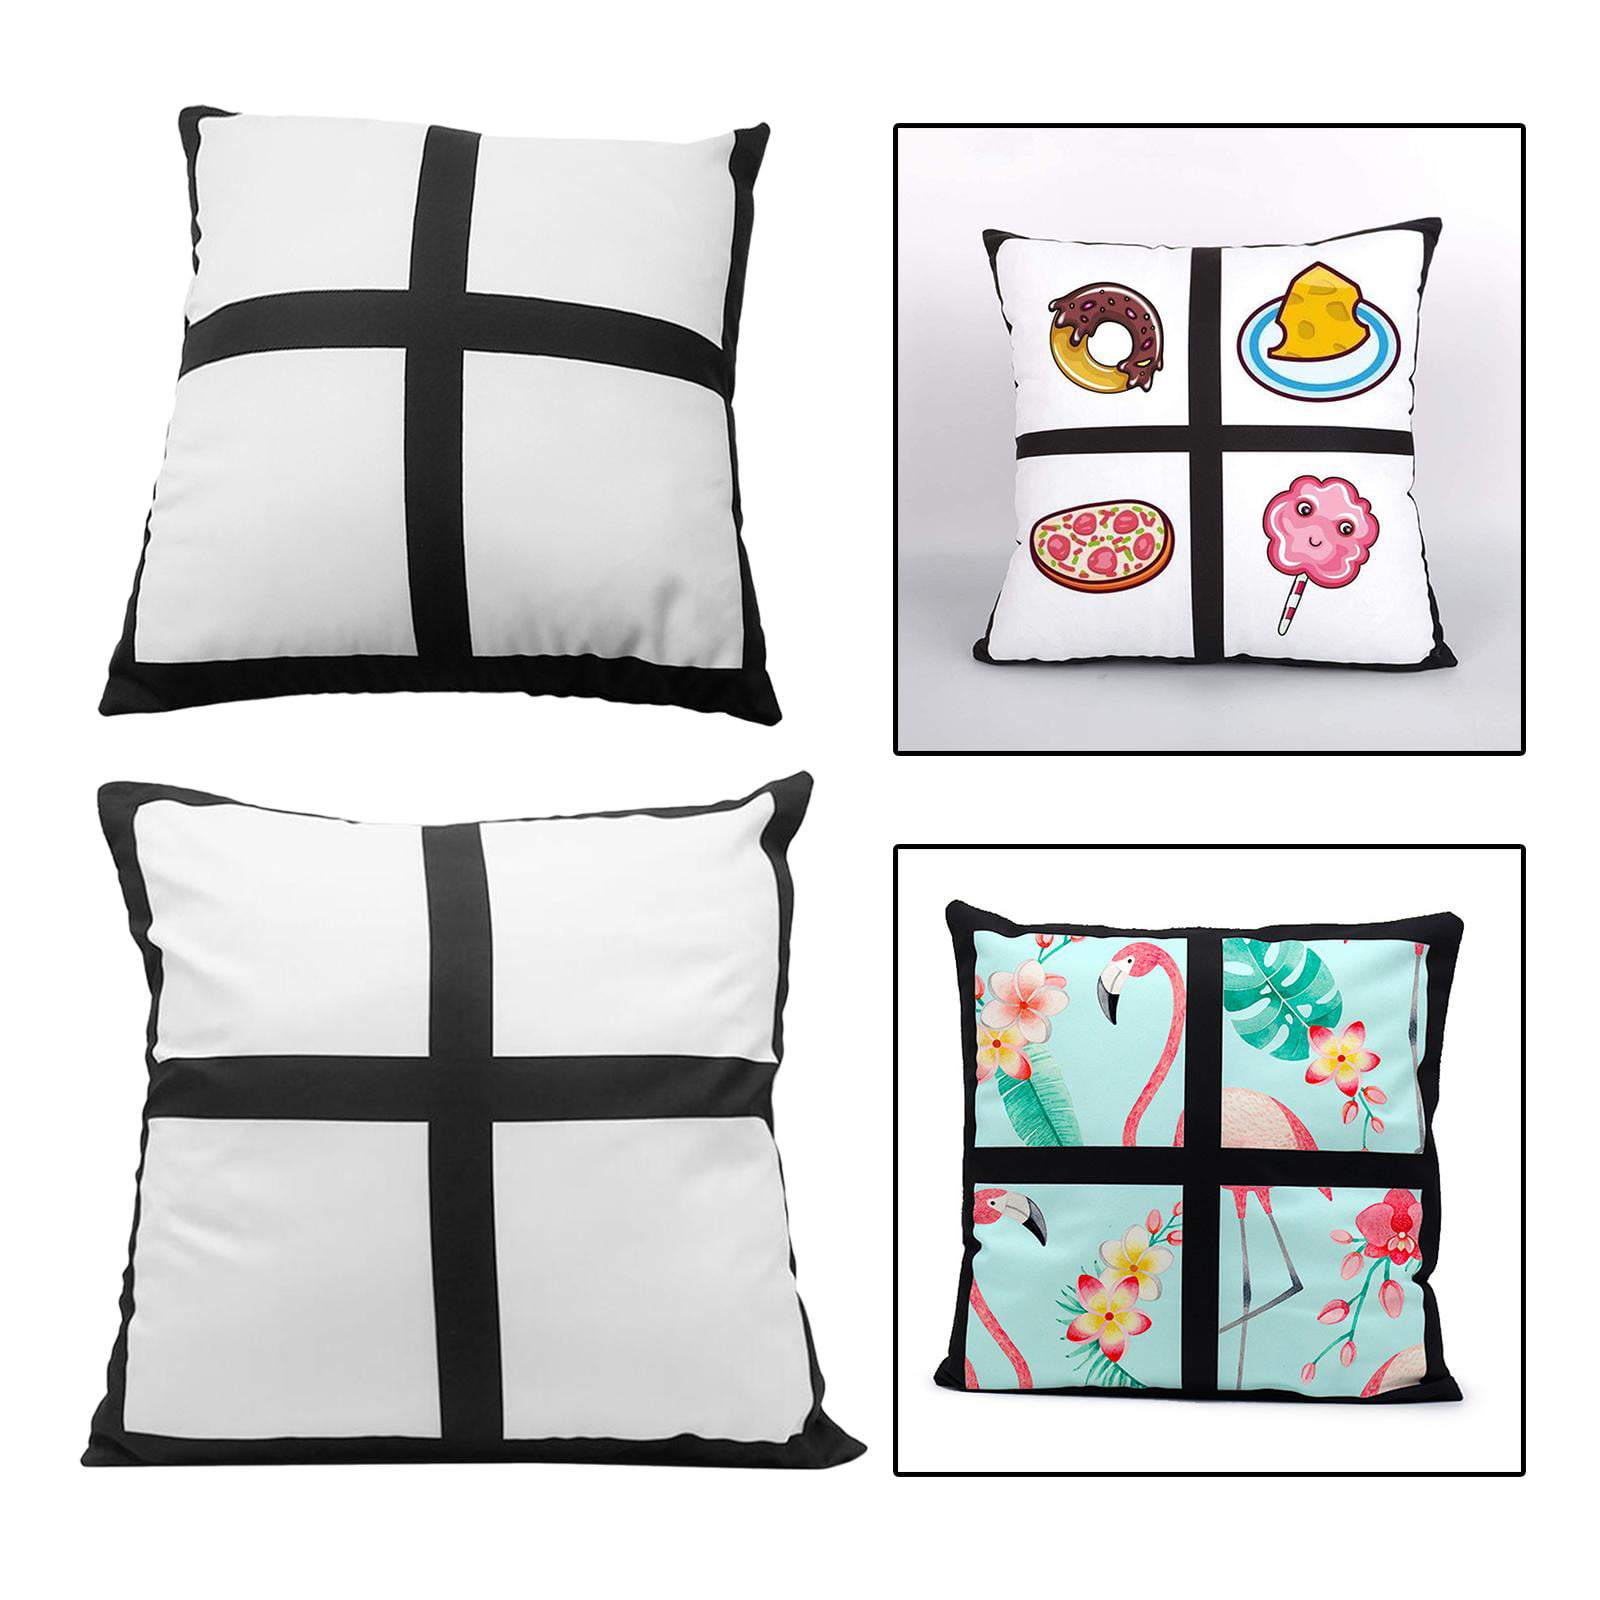 10pcs 15.75" 6 Grid Panel Section Photo Sublimation Blanks Cushion Pillow Cover 